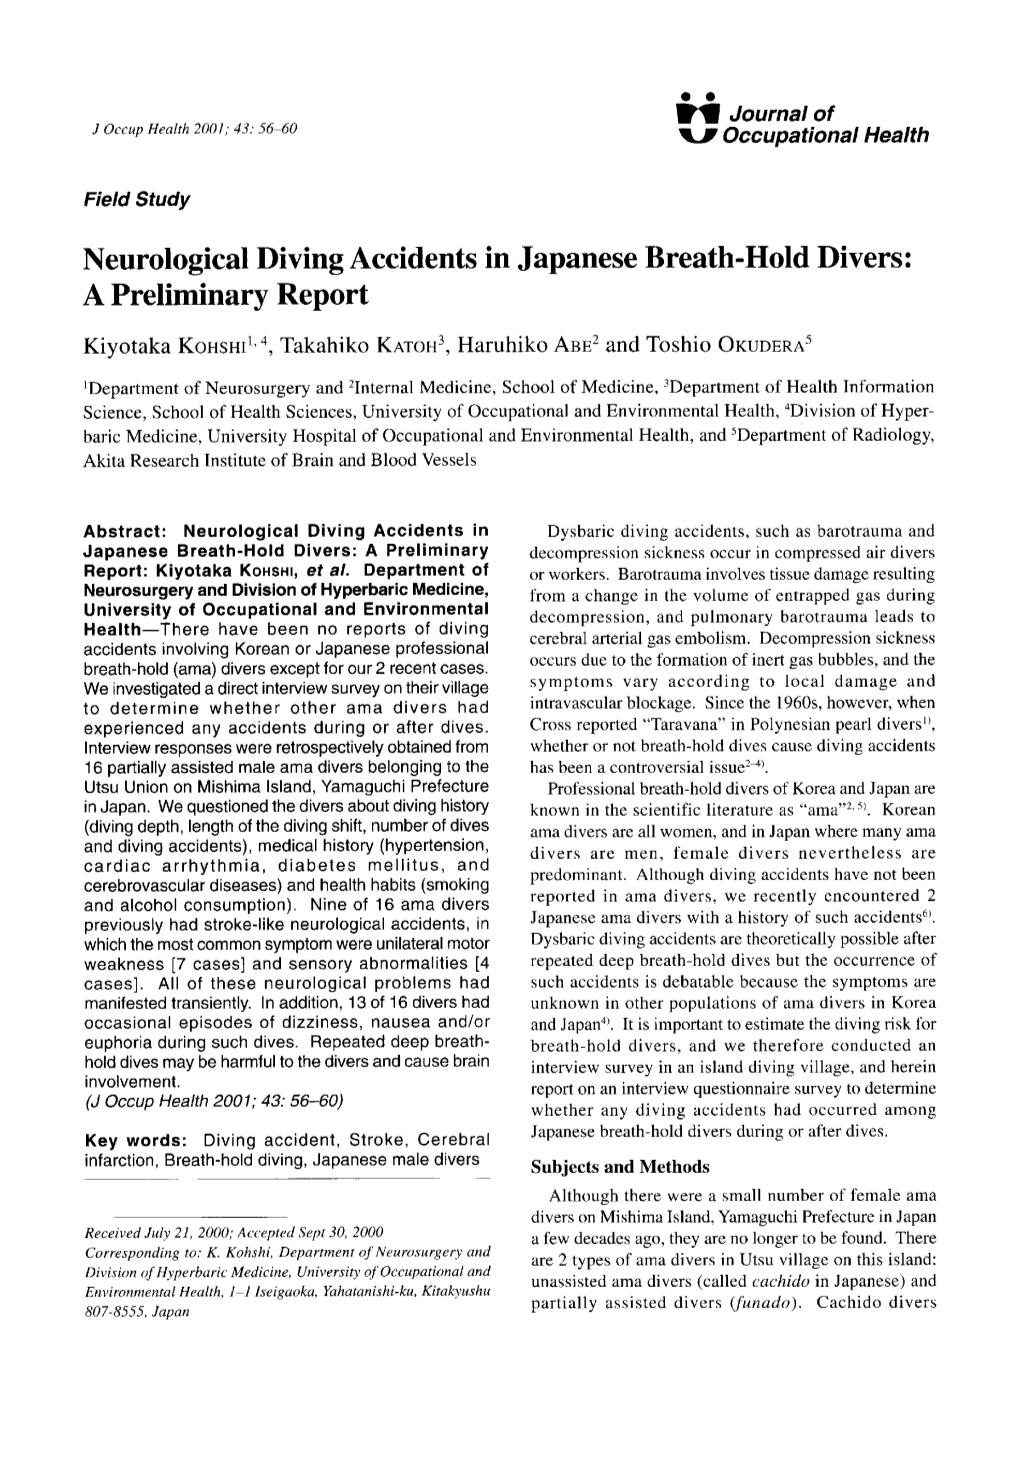 Field Study Neurological Diving Accidents in Japanese